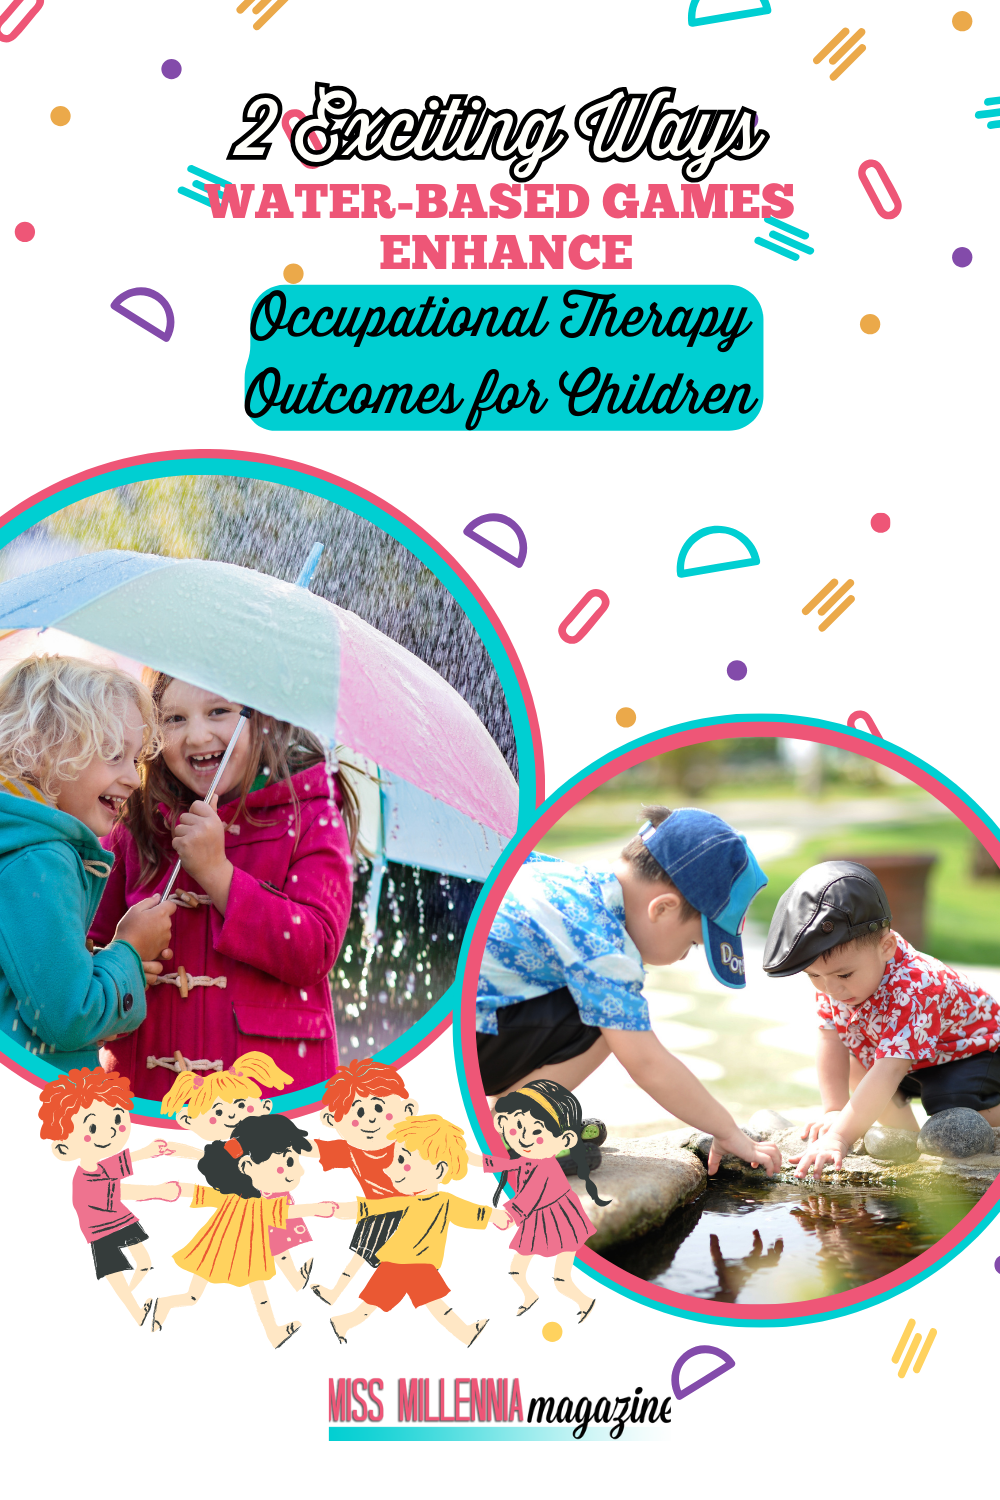 2 Exciting Ways Water-Based Games Enhance Occupational Therapy Outcomes for Children